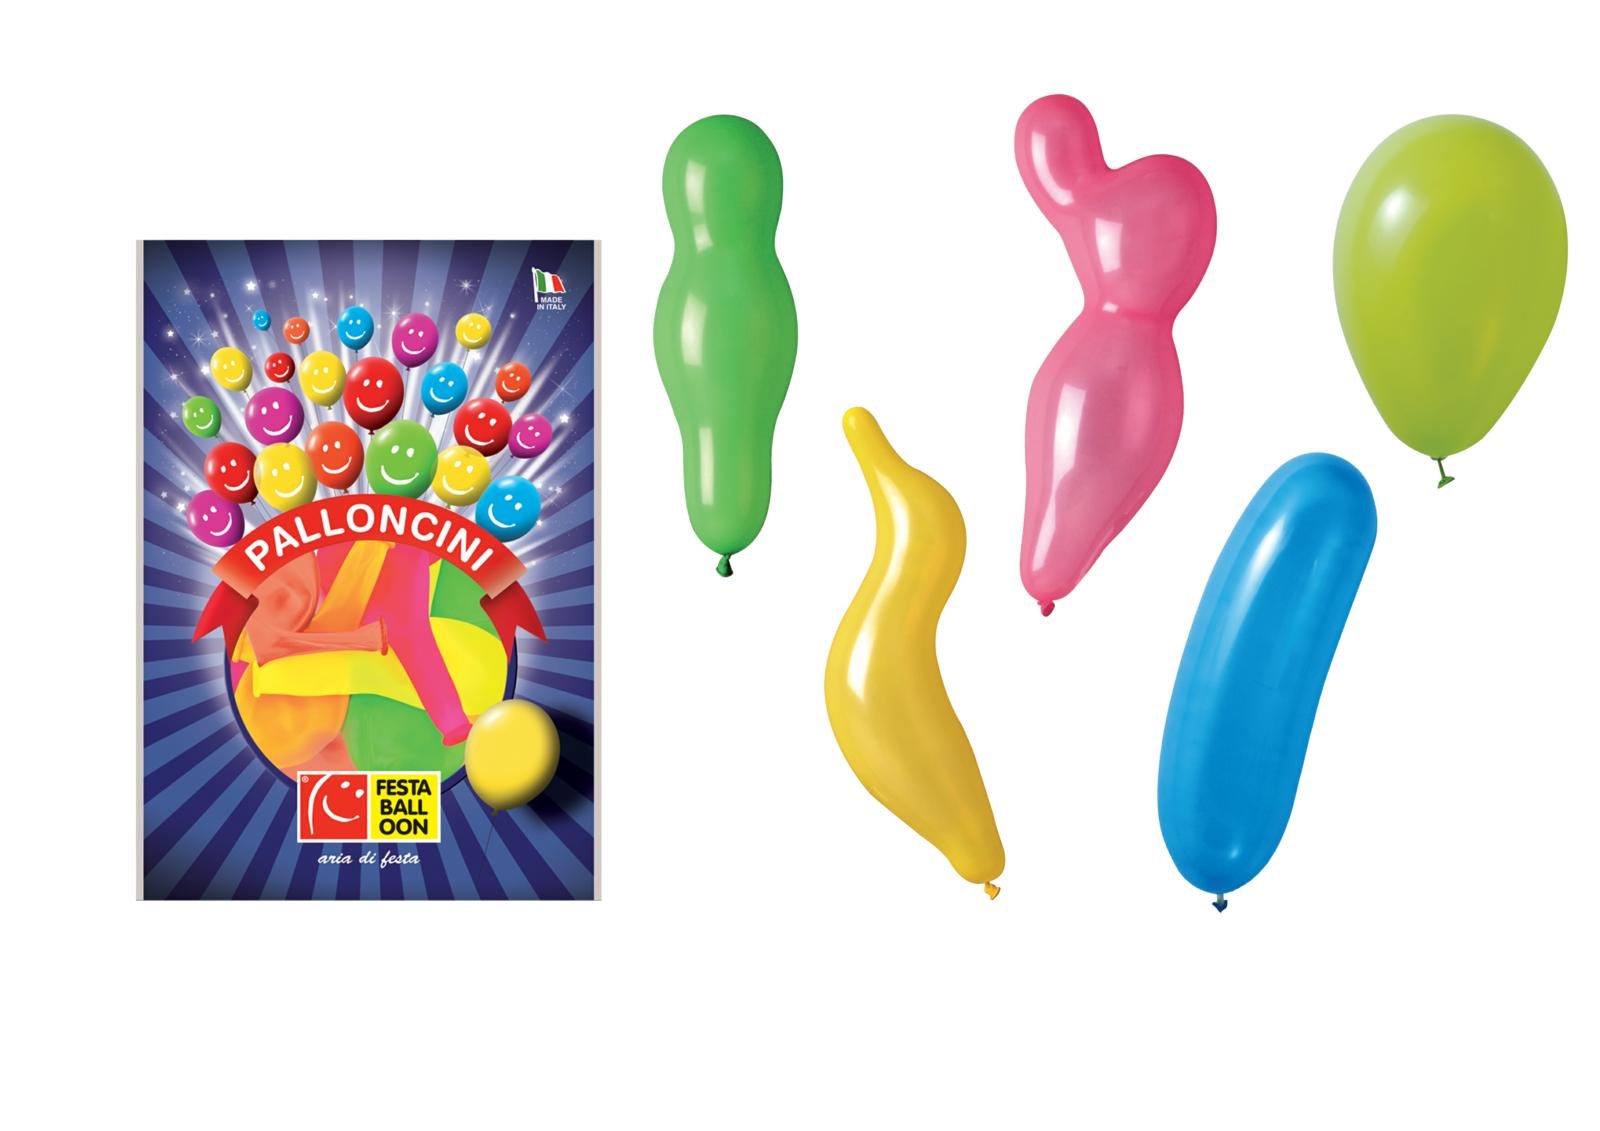 28 balloons inflat. different shapes